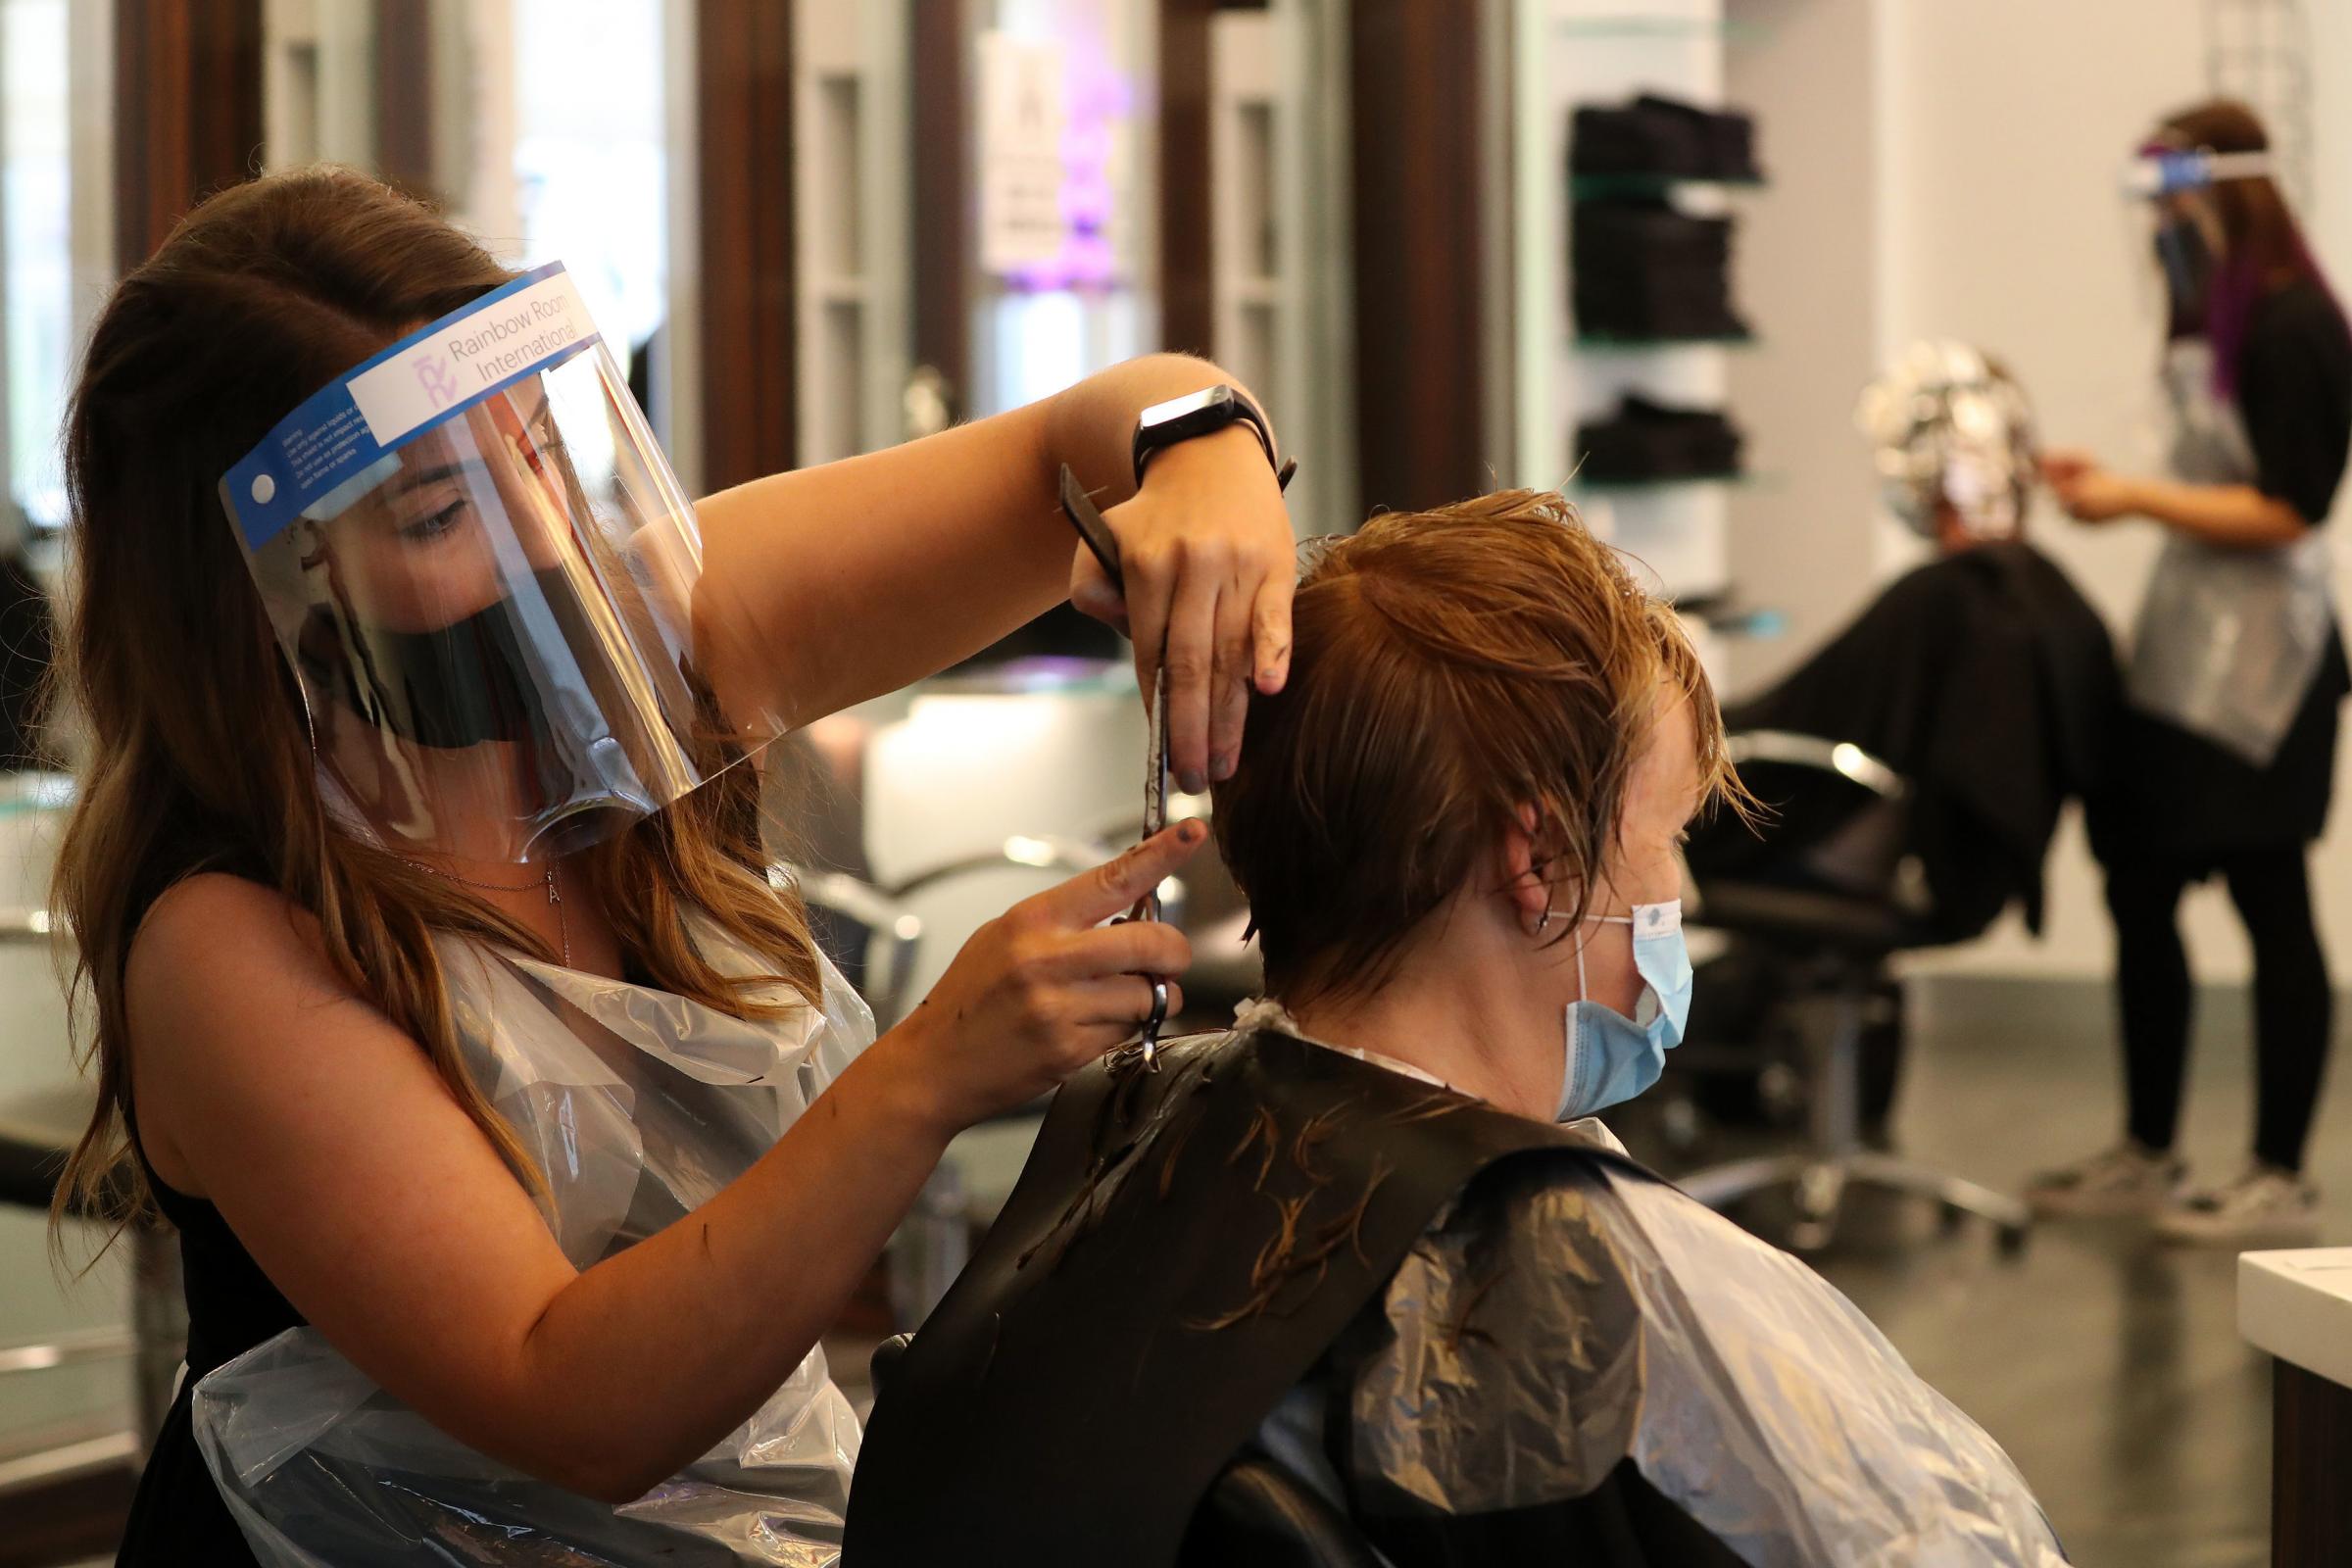 Hairdressers have been inundated with clients looking to book appointments